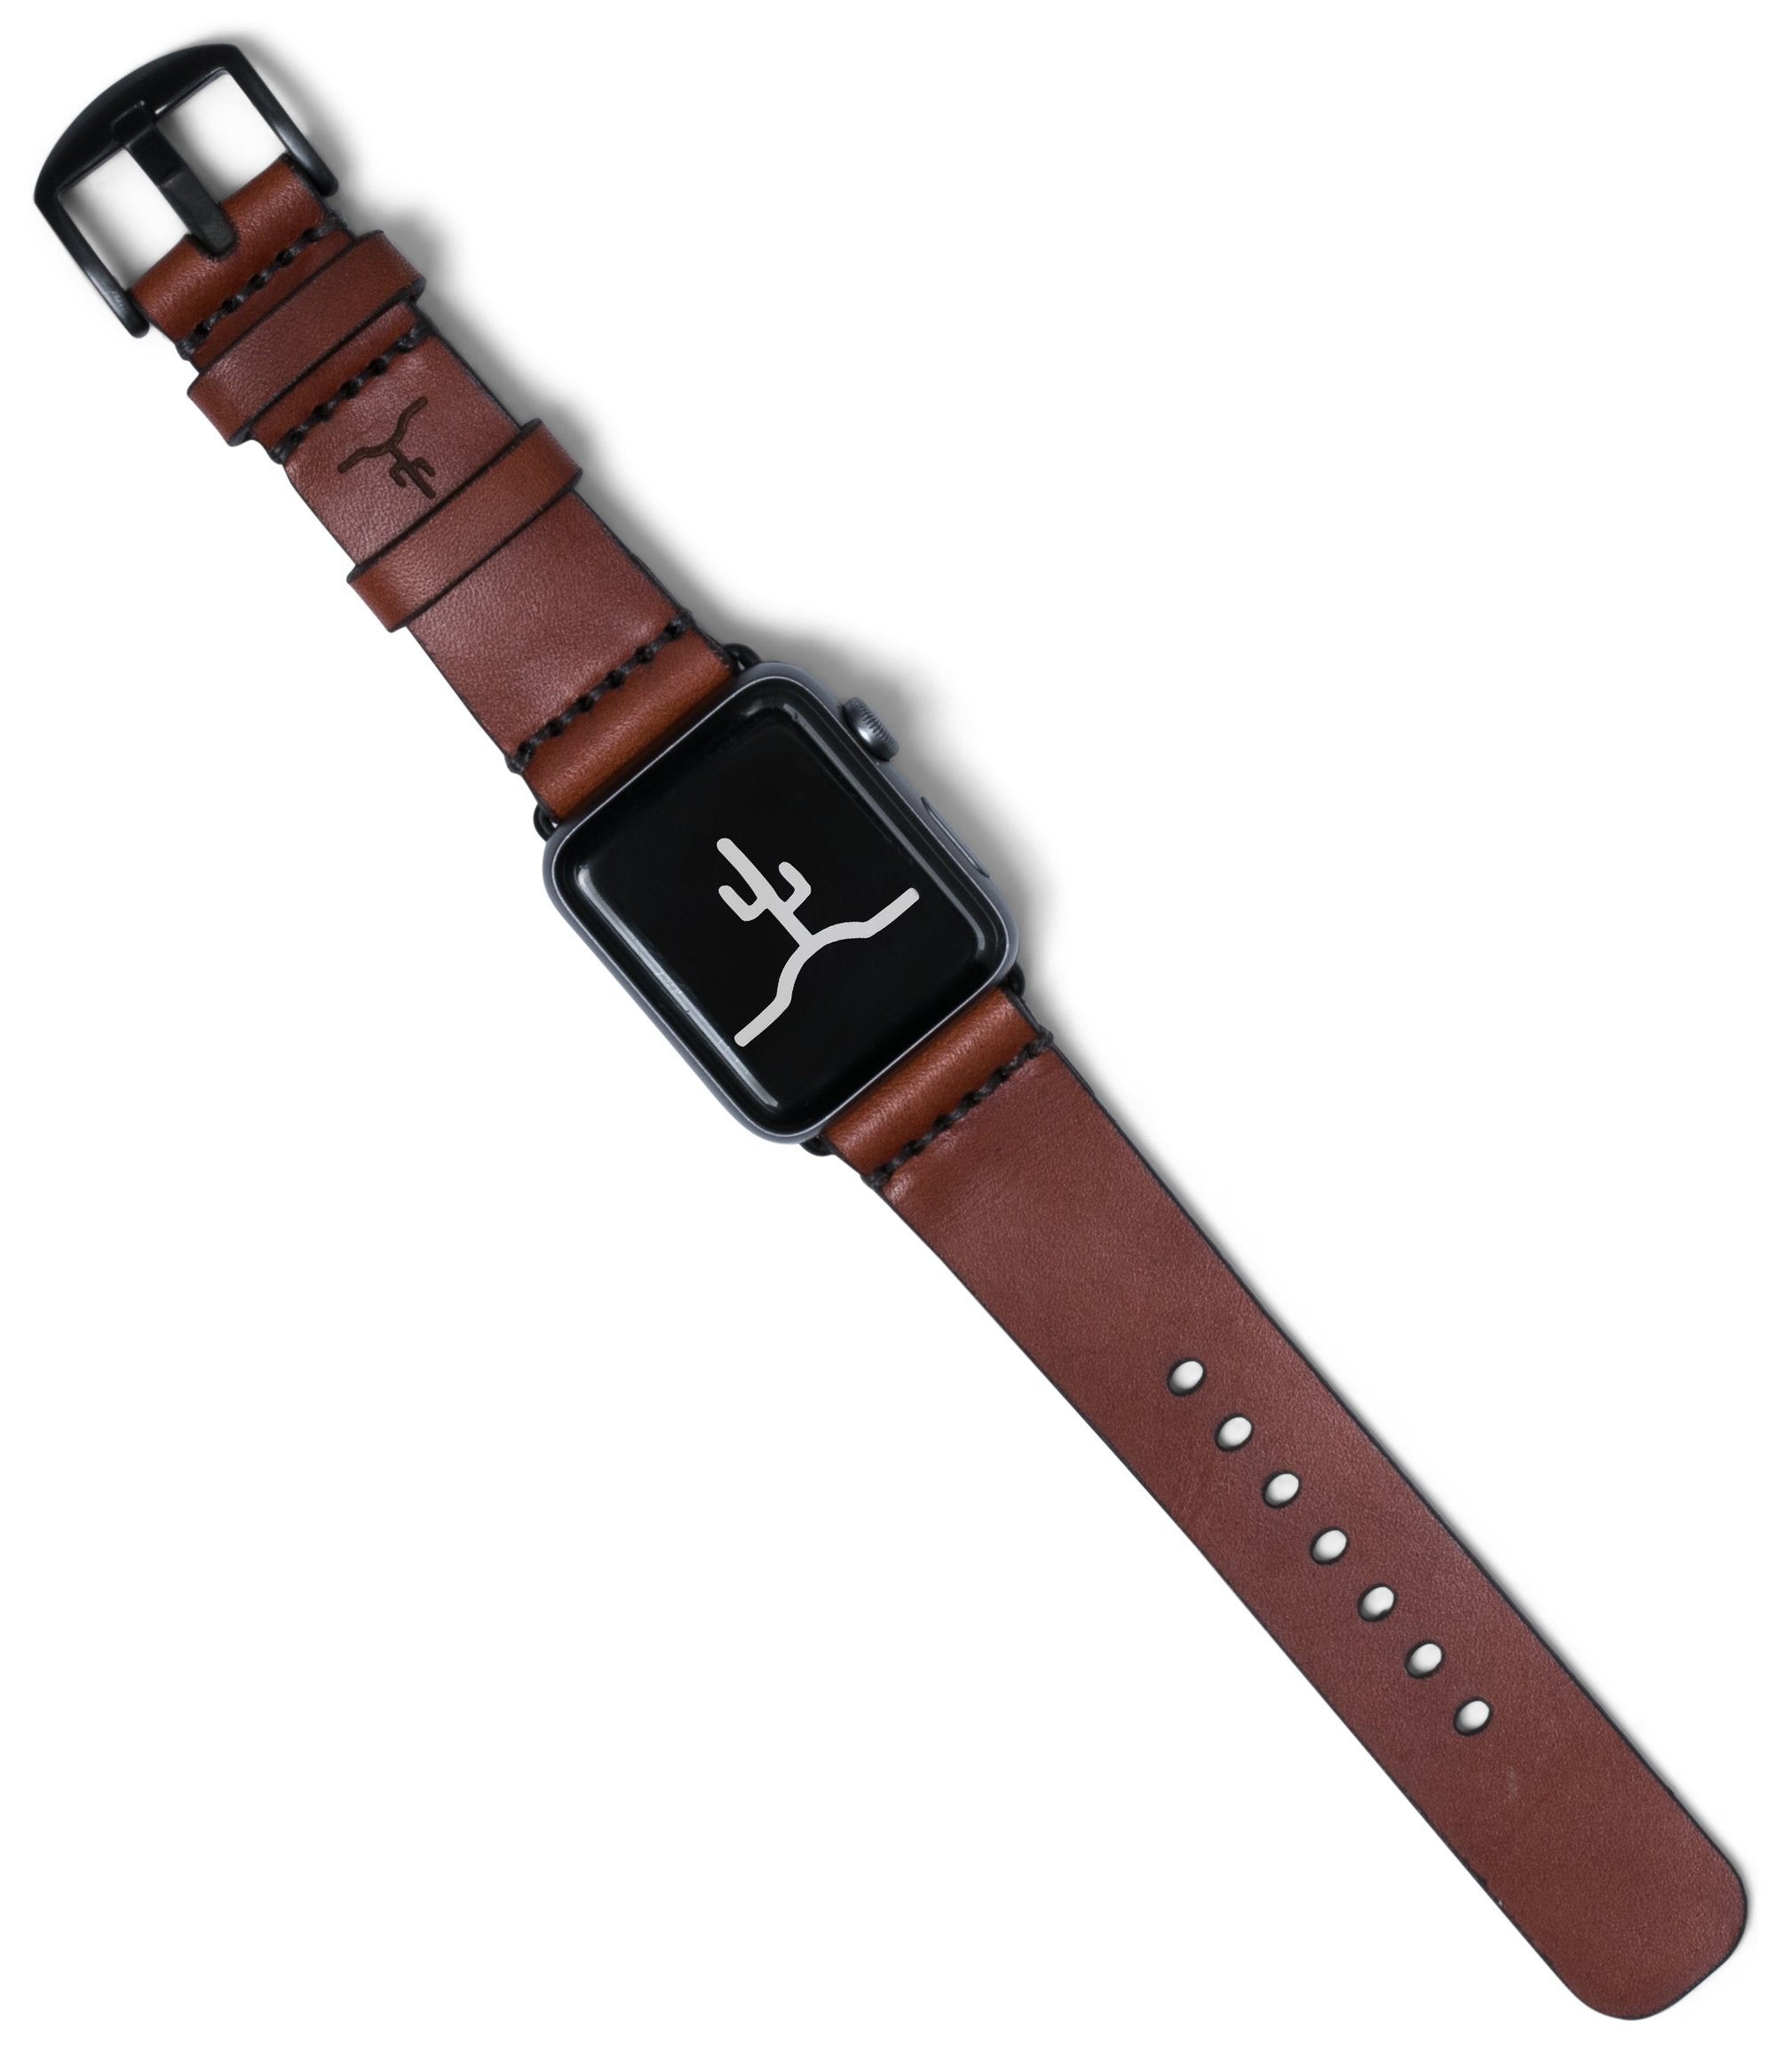 watch with leather strap